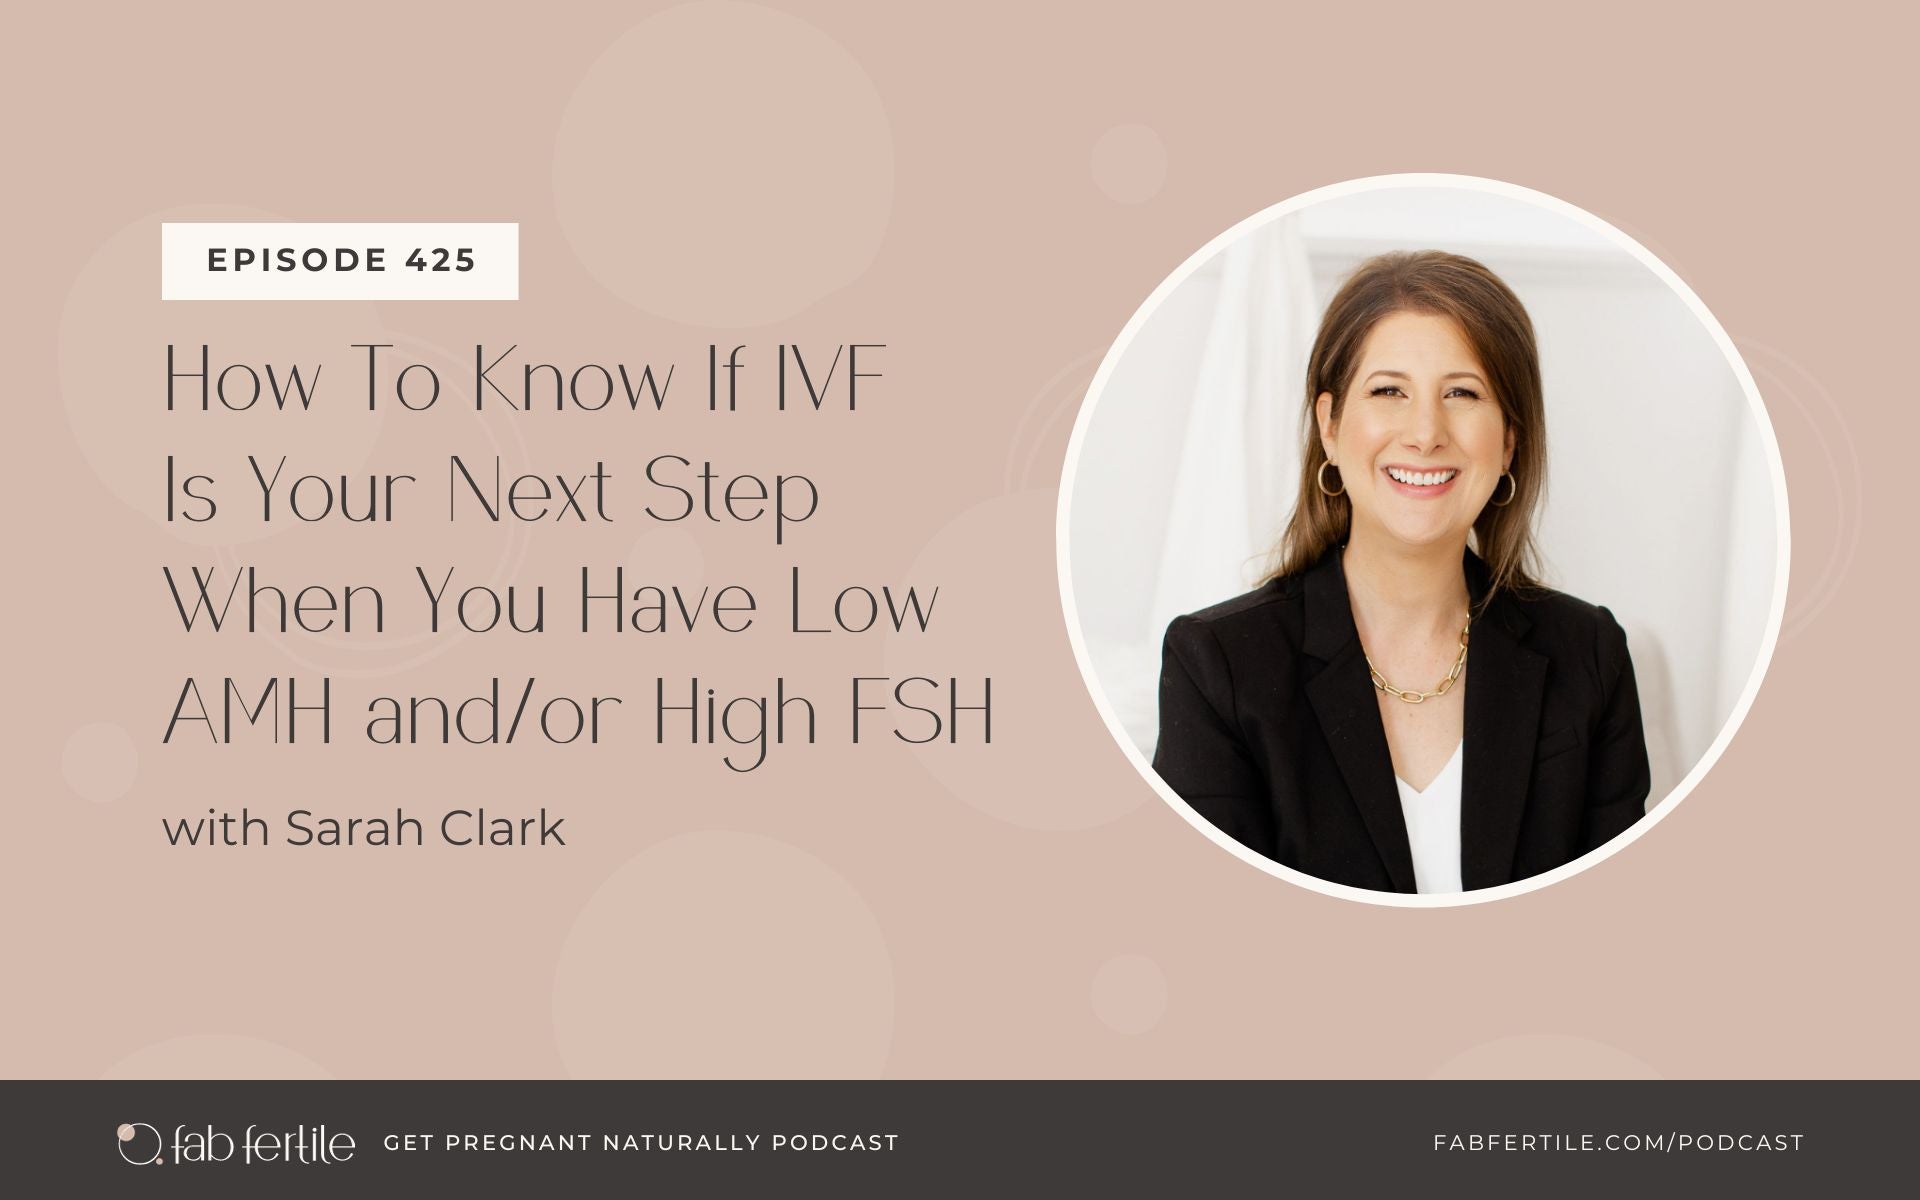 How To Know If IVF Is Your Next Step When You Have Low AMH and/or High FSH